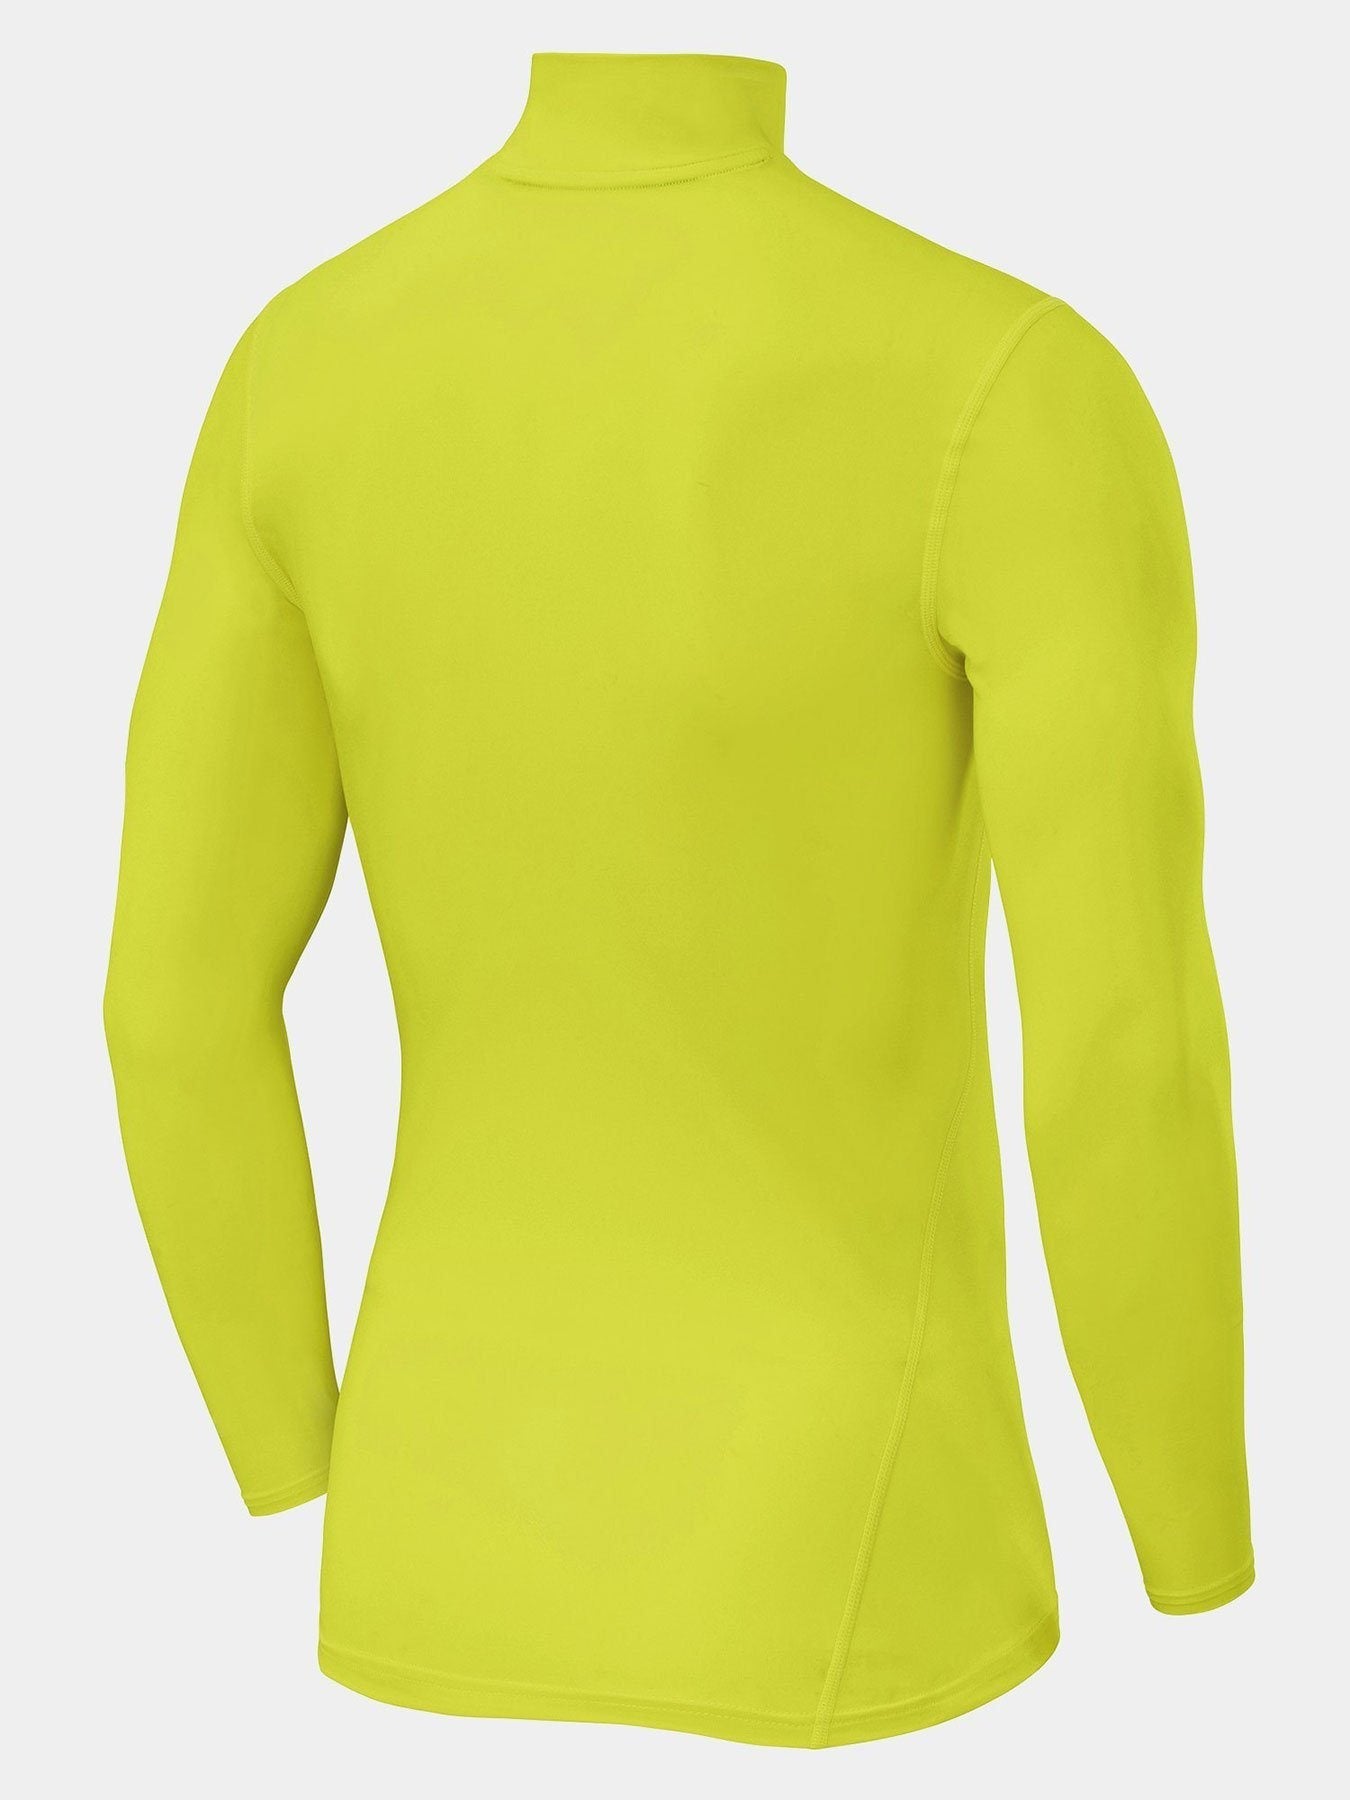 Pro Performance Compression Base Layer Long Sleeve Mock Neck For Boys